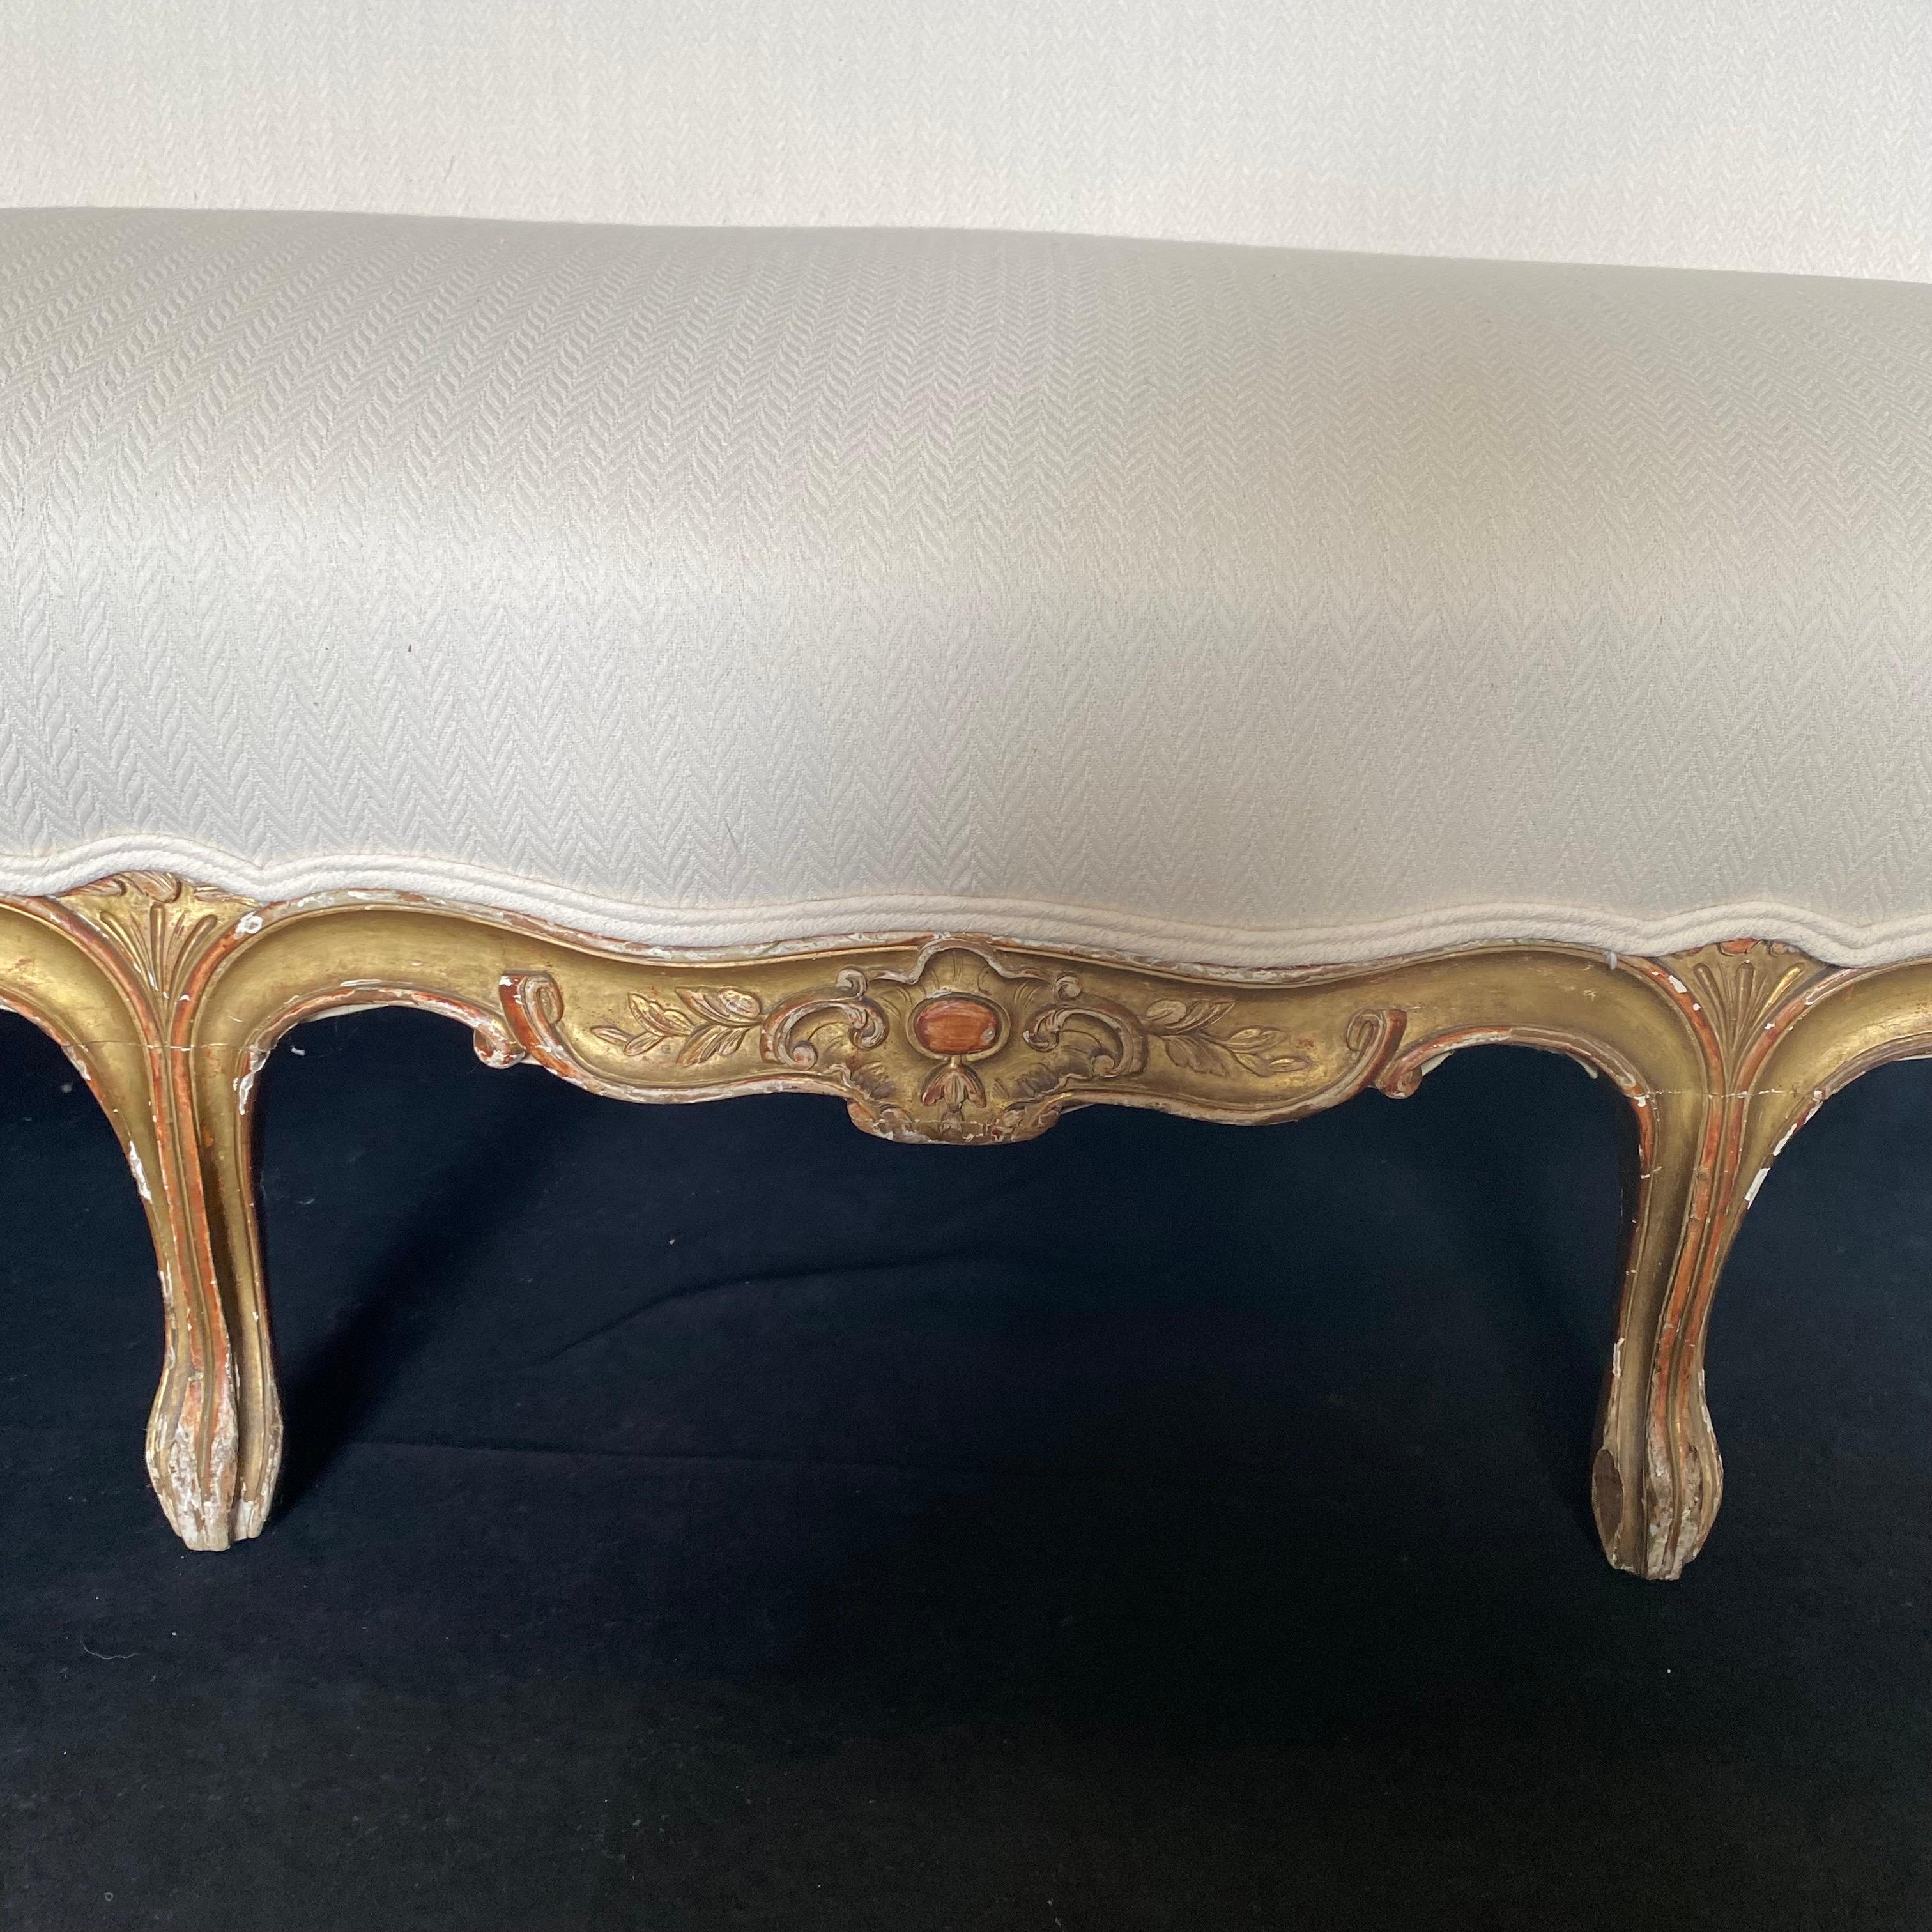 Superb Carved Gilded 19th Century Louis XV French Provencal Sofa For Sale 2